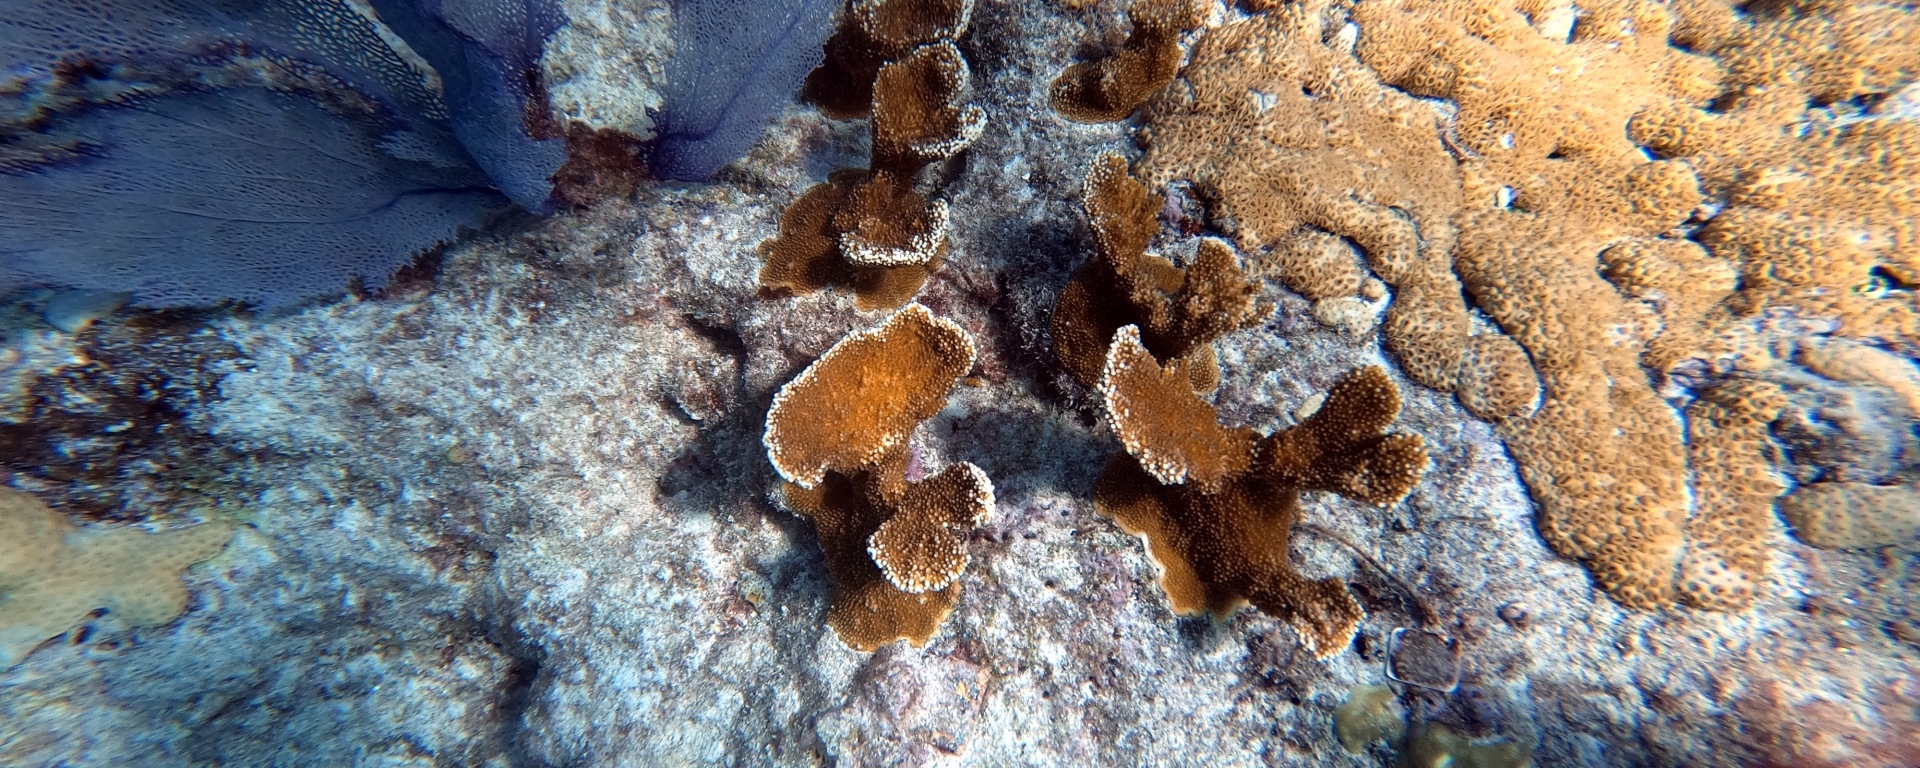 Several species of blue and brown corals can be seen on the reef, including soft and hard species.